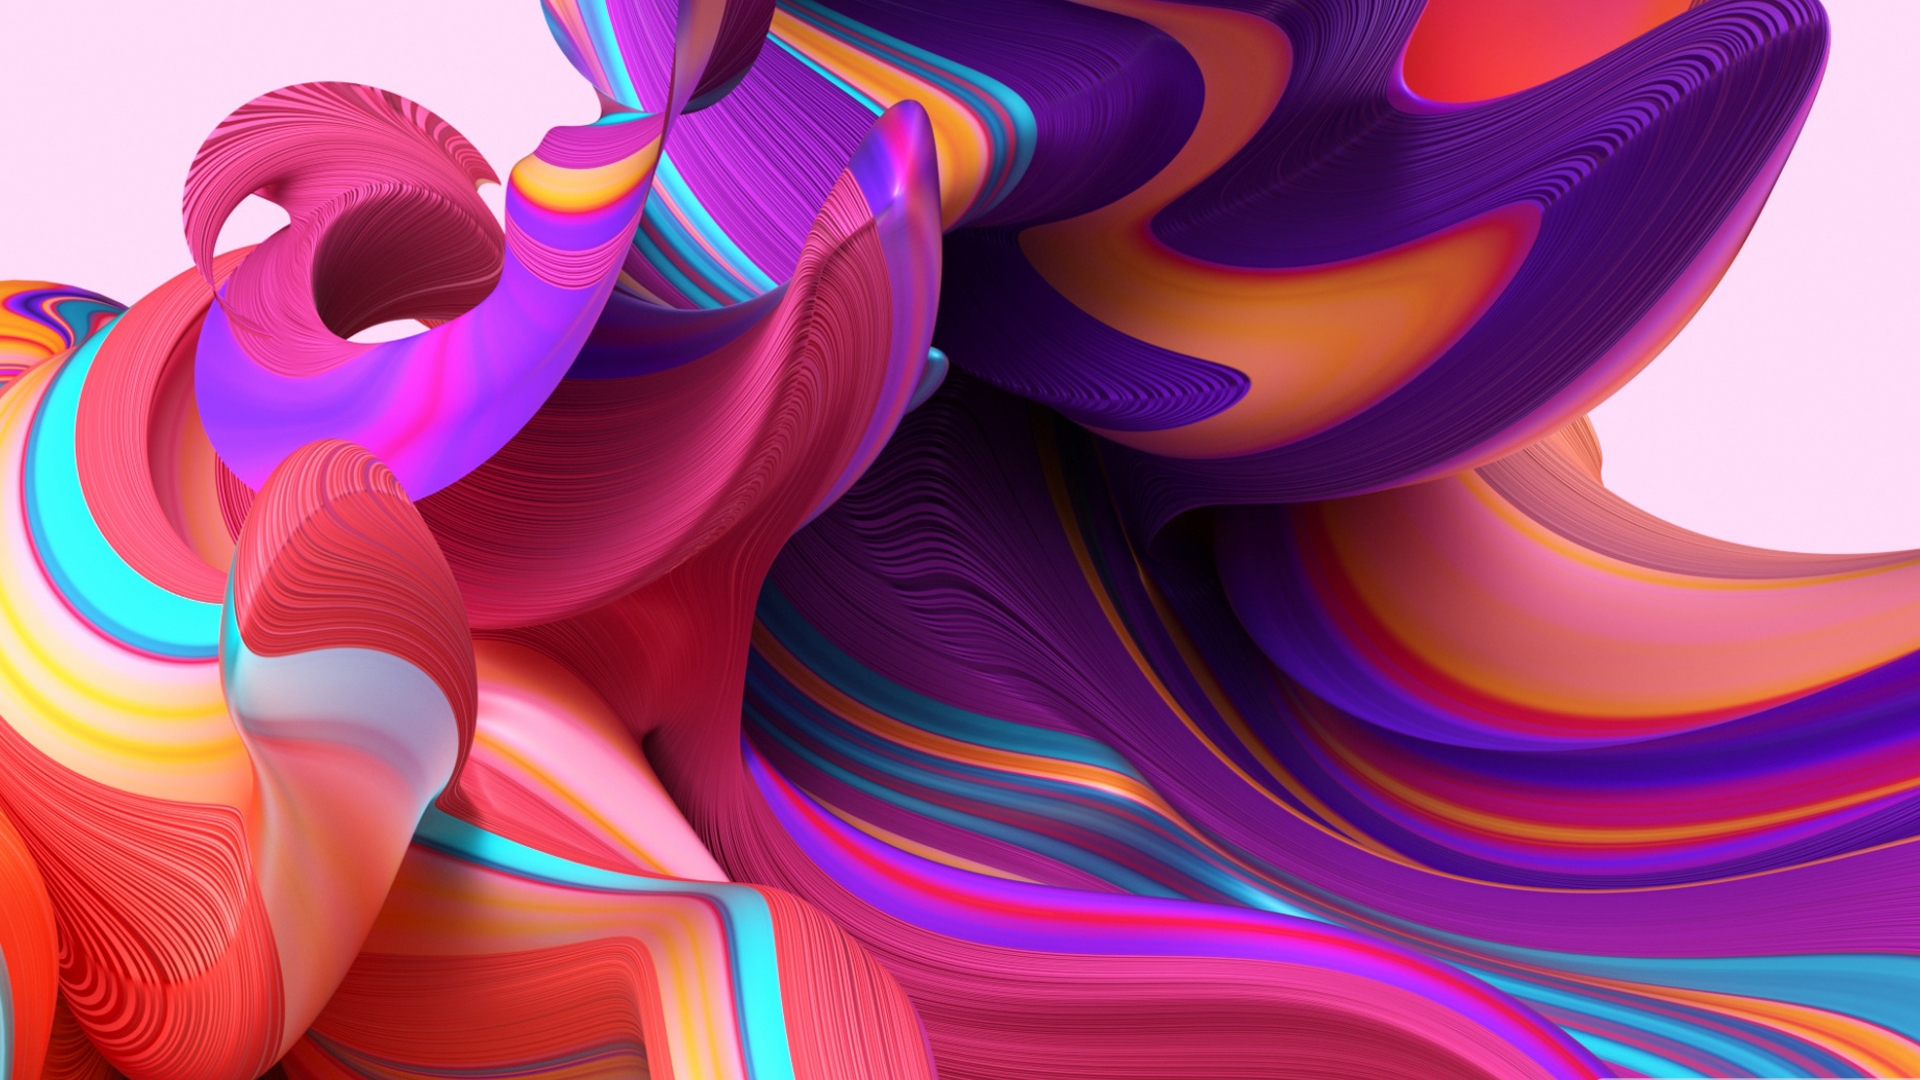 Wallpapers spiral abstraction wallpaper pastel colors on the desktop